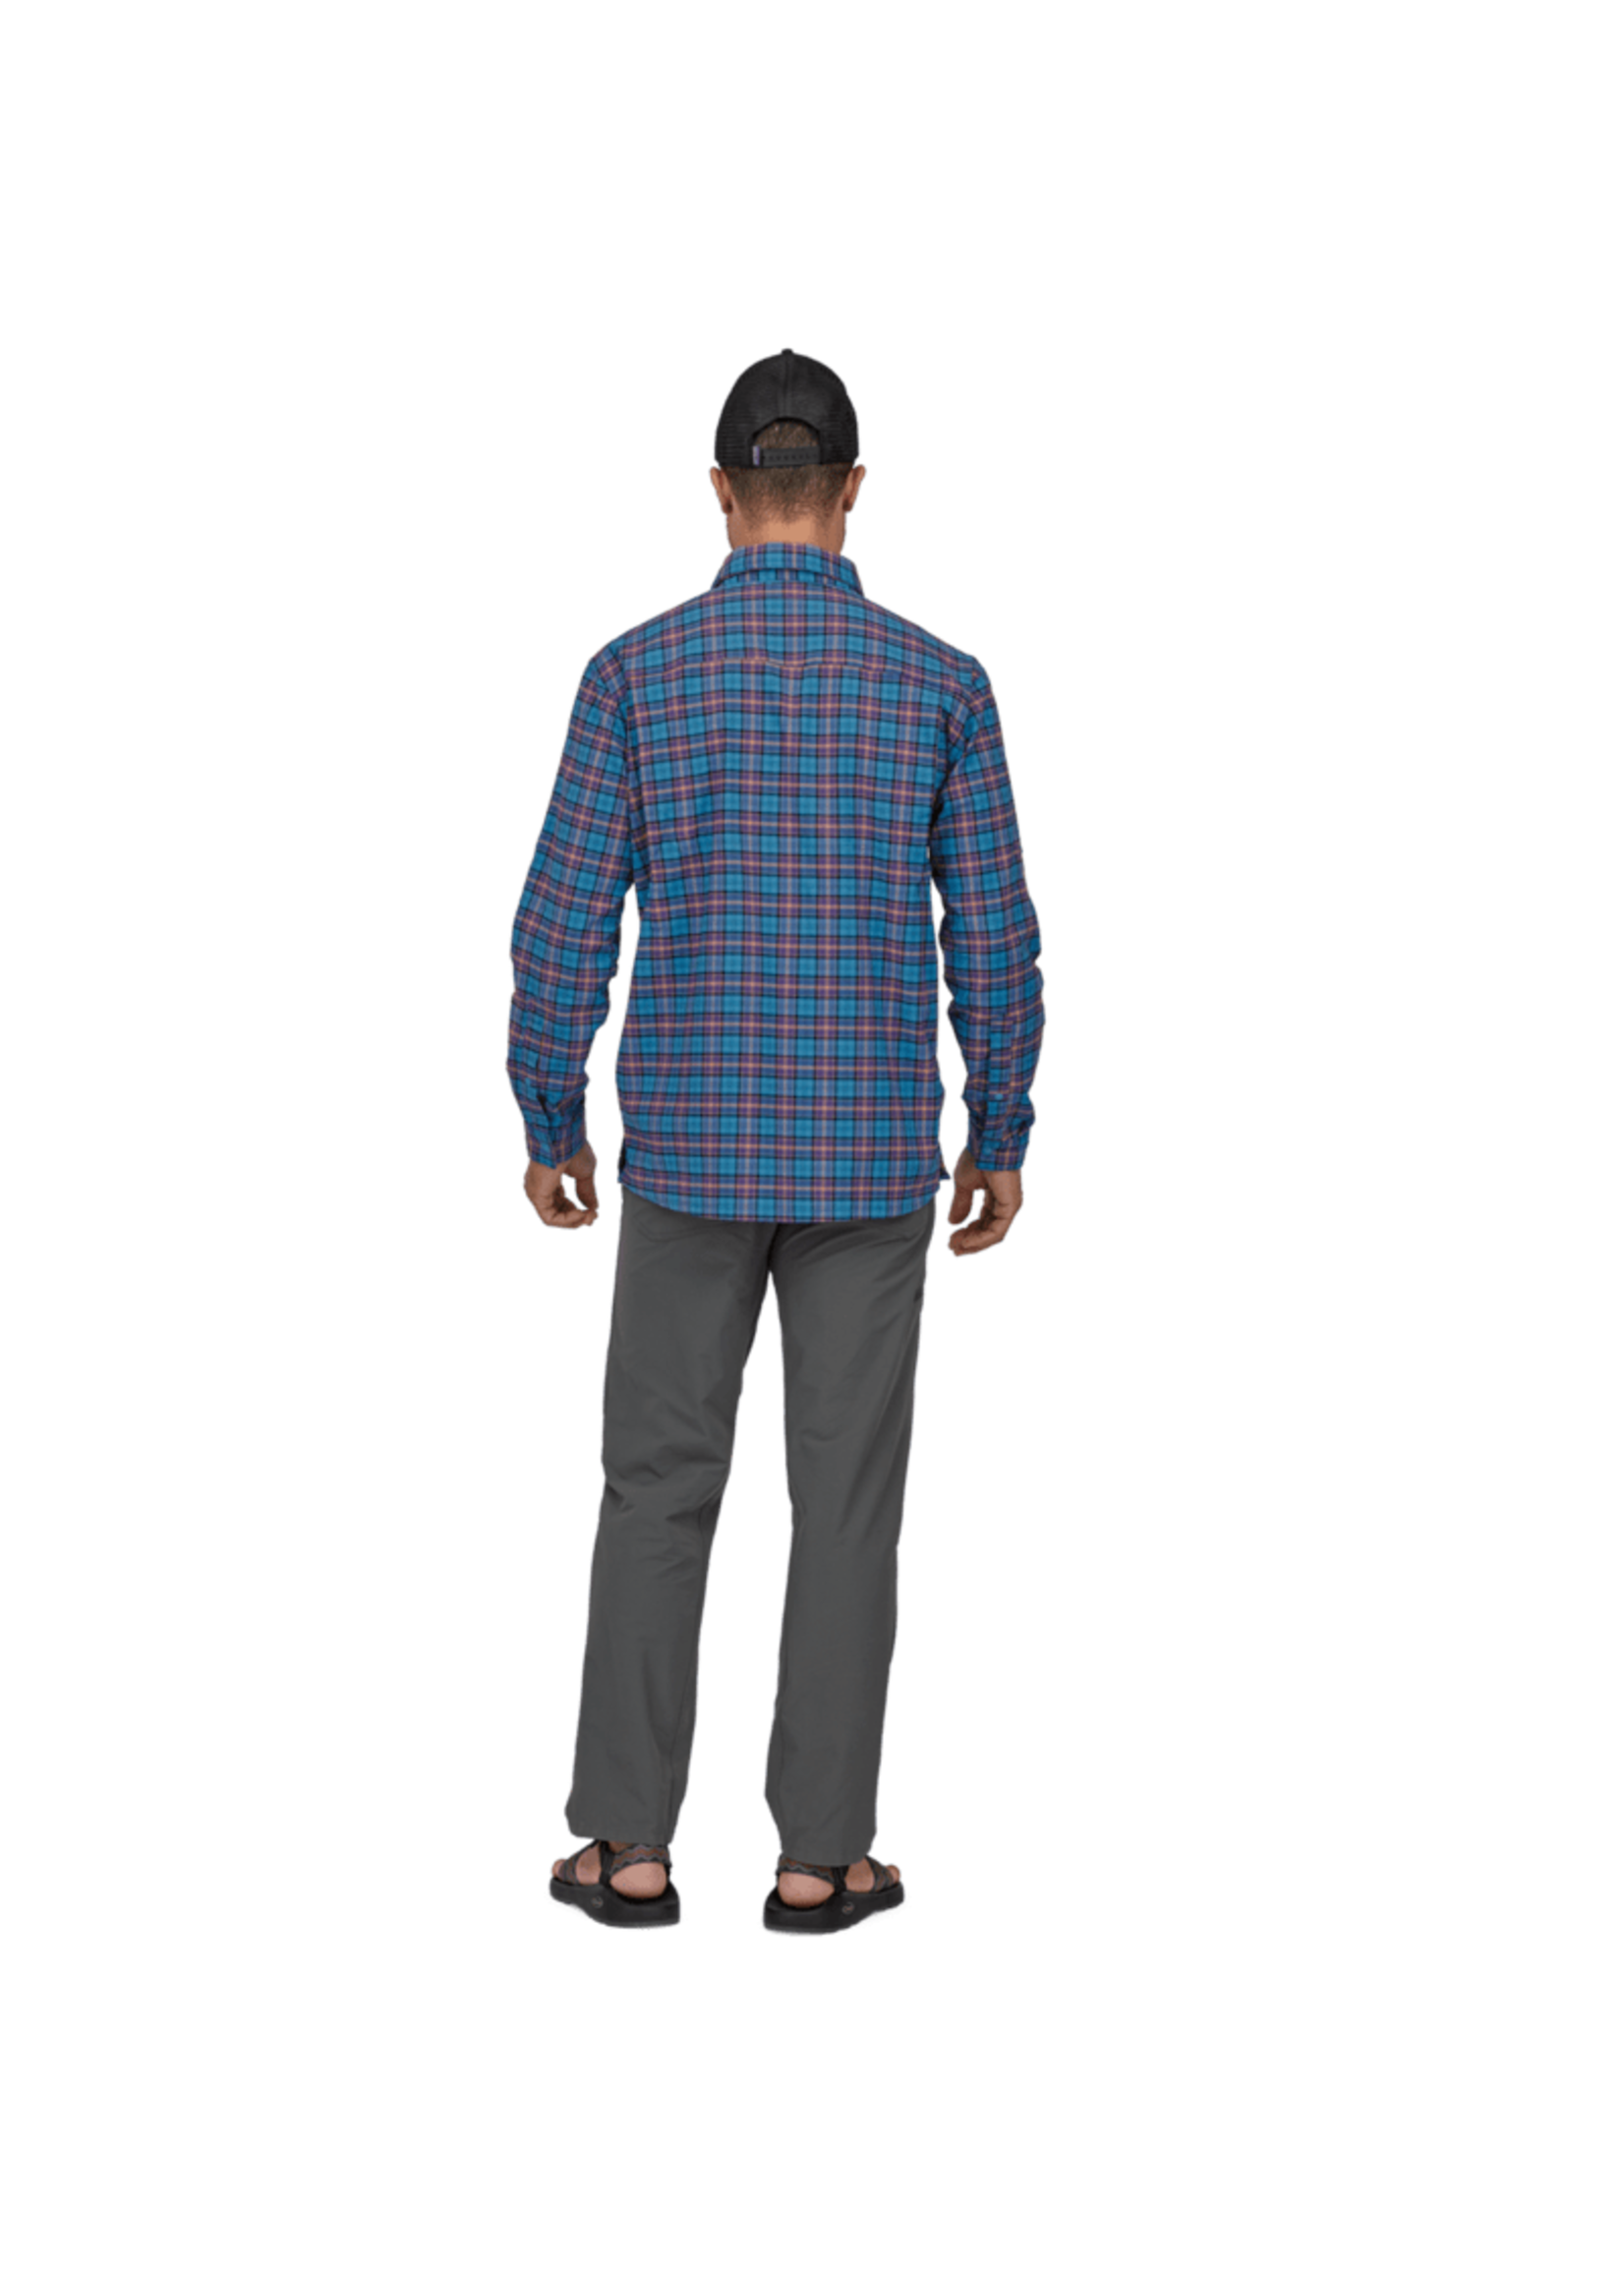 Patagonia Men's Early Rise Stretch Shirt On the Fly: Anacapa Blue